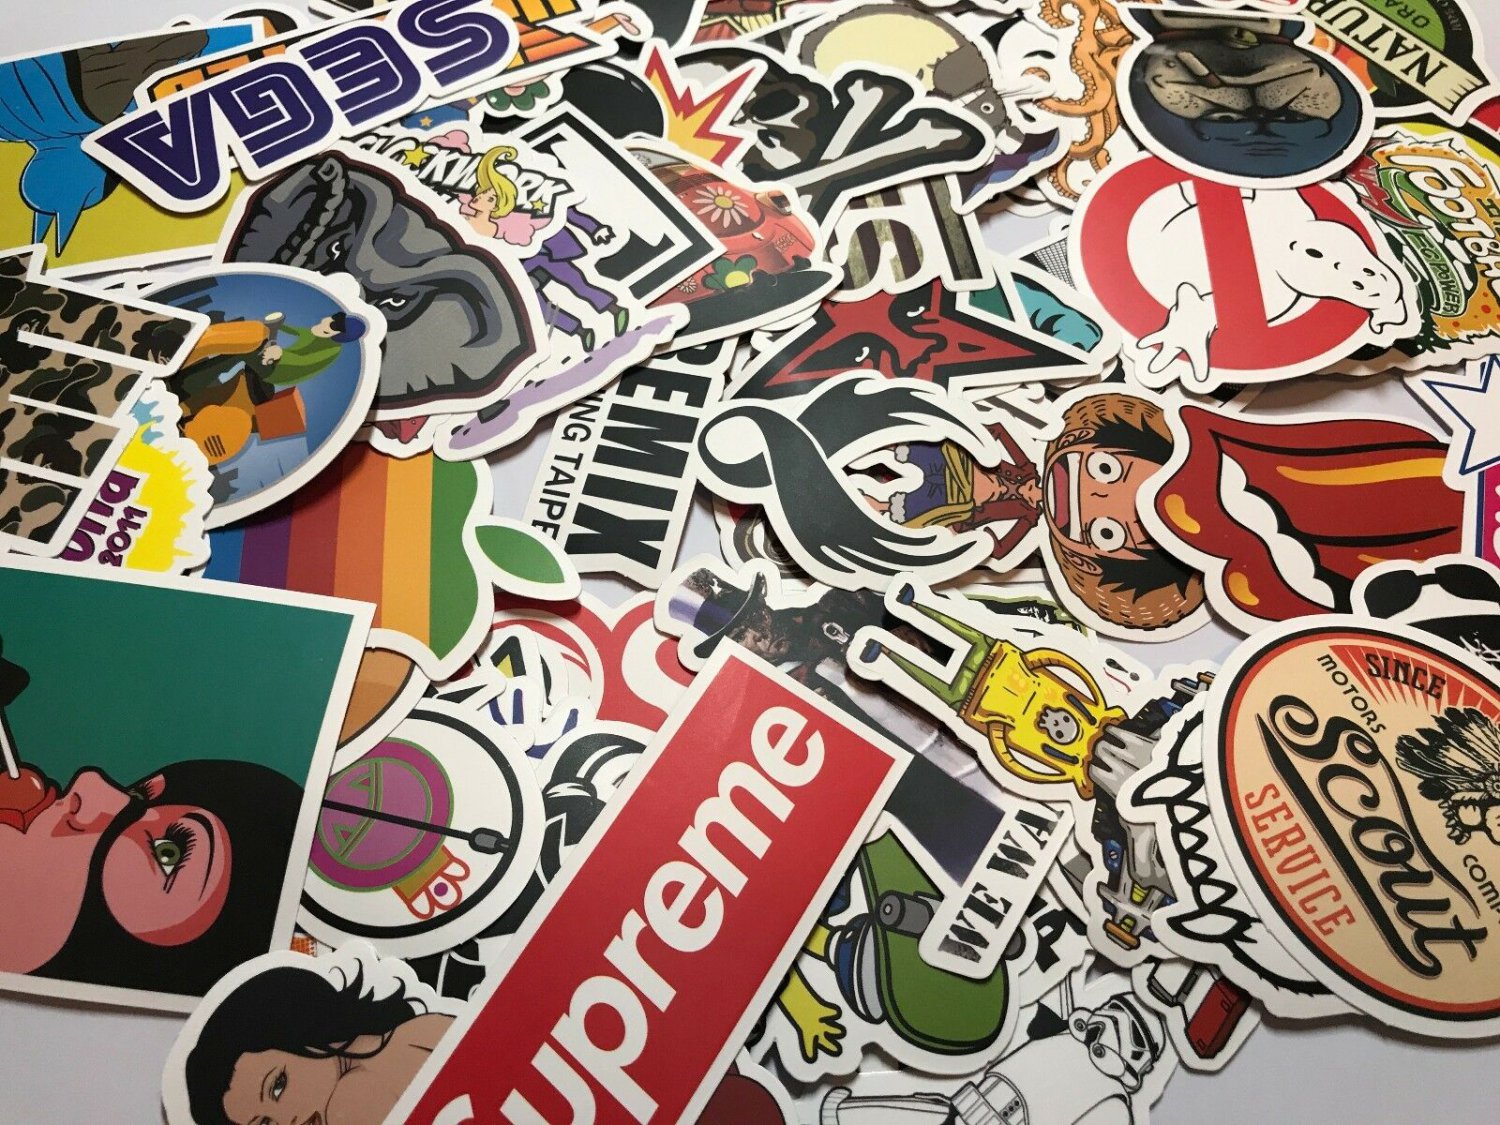 Details about   100pc Skateboard Stickers bomb Vinyl Laptop Luggage Decals Dope Sticker 